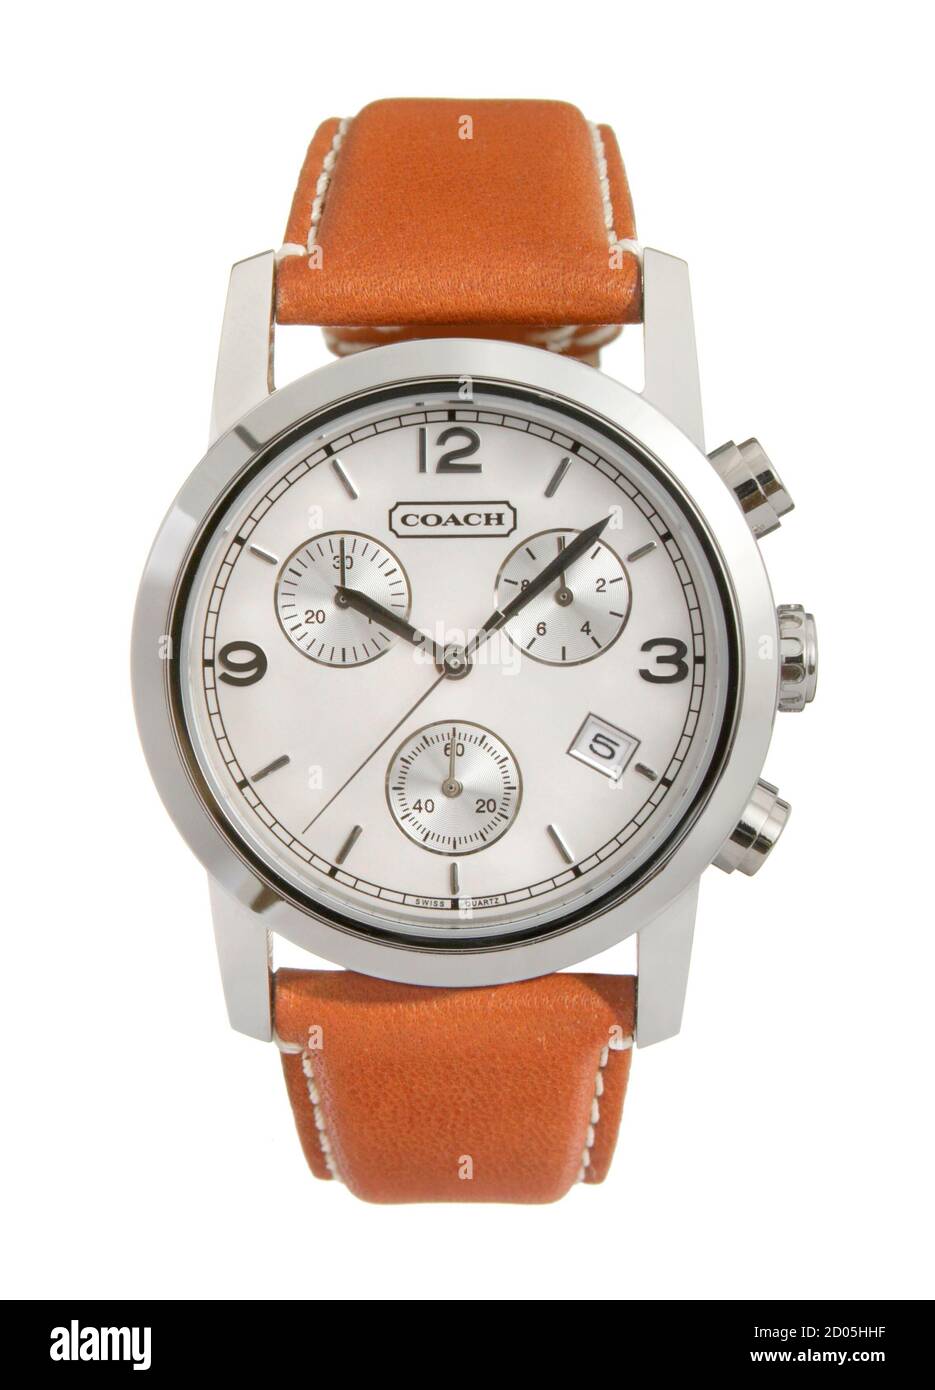 coach watch with a light brown leather strap photographed on a white background Stock Photo